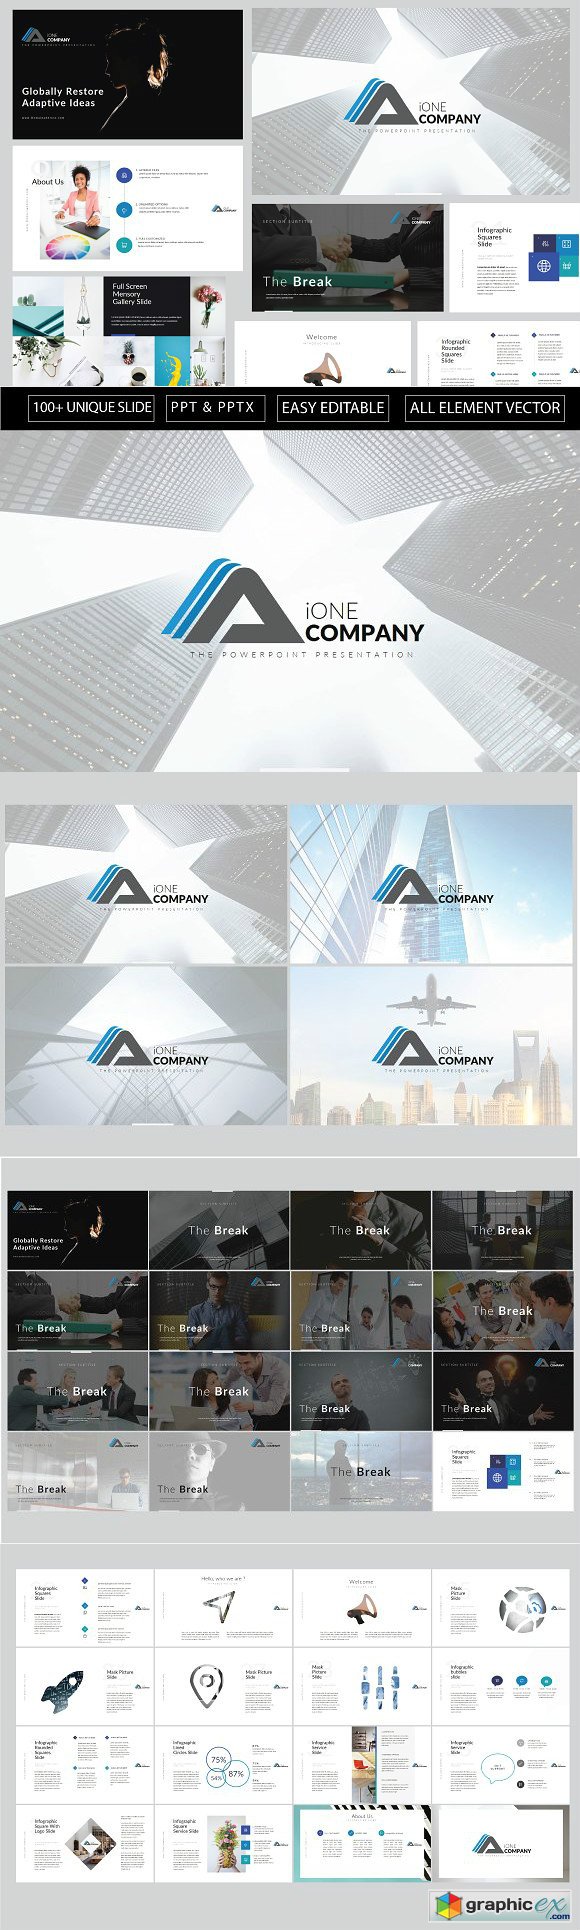 iONE Business Powerpoint Template